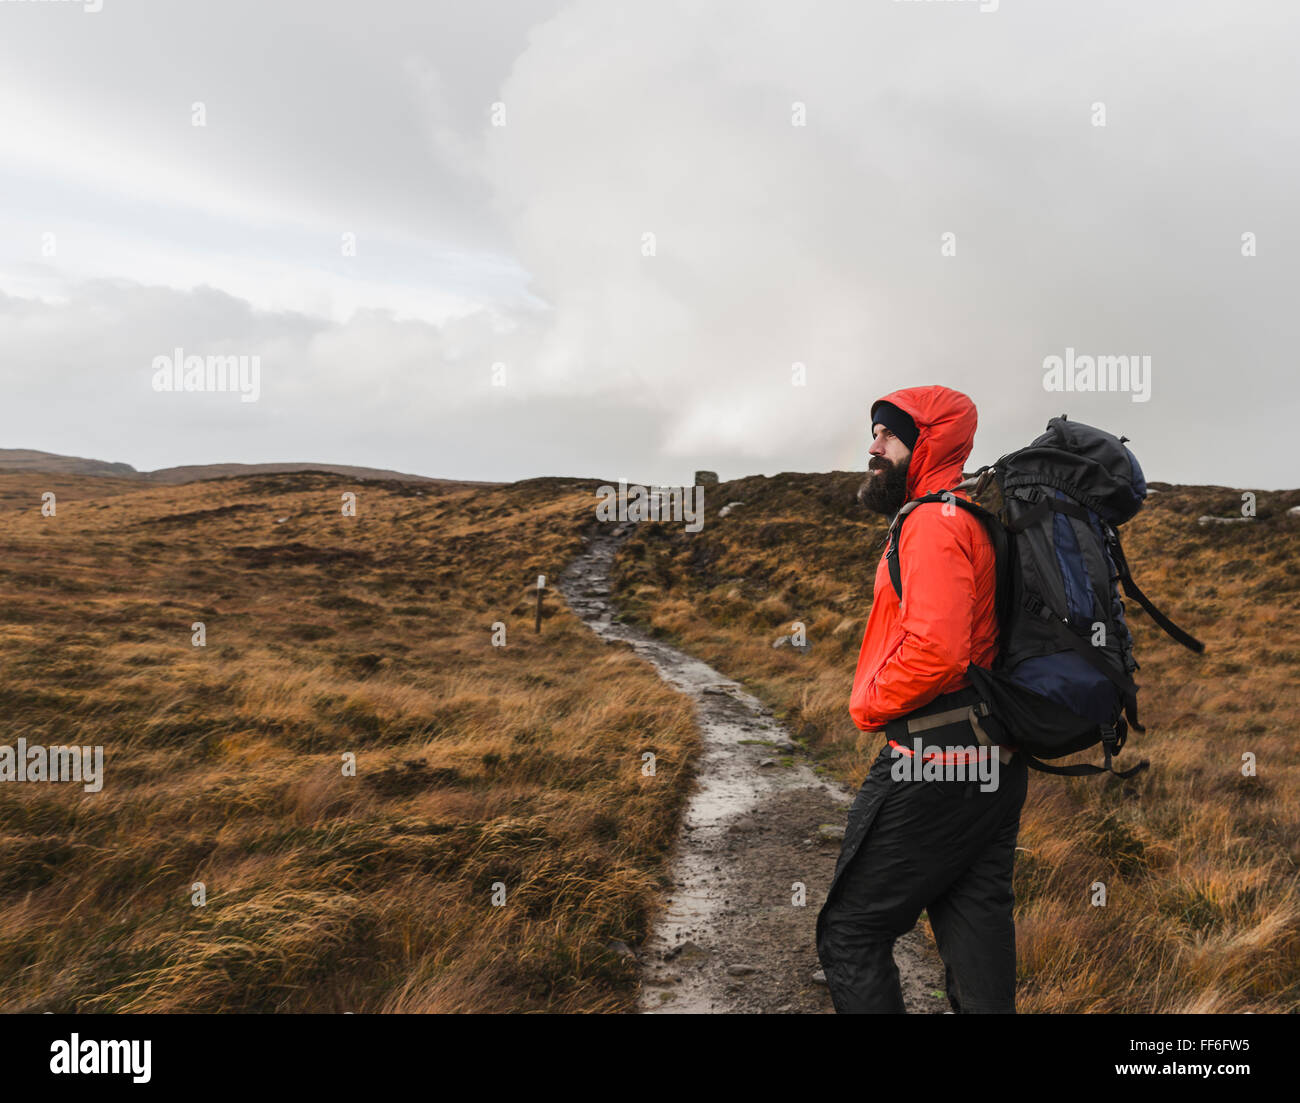 A man in winter clothing, waterproof jacket and rucksack in open countryside by a path. Stock Photo